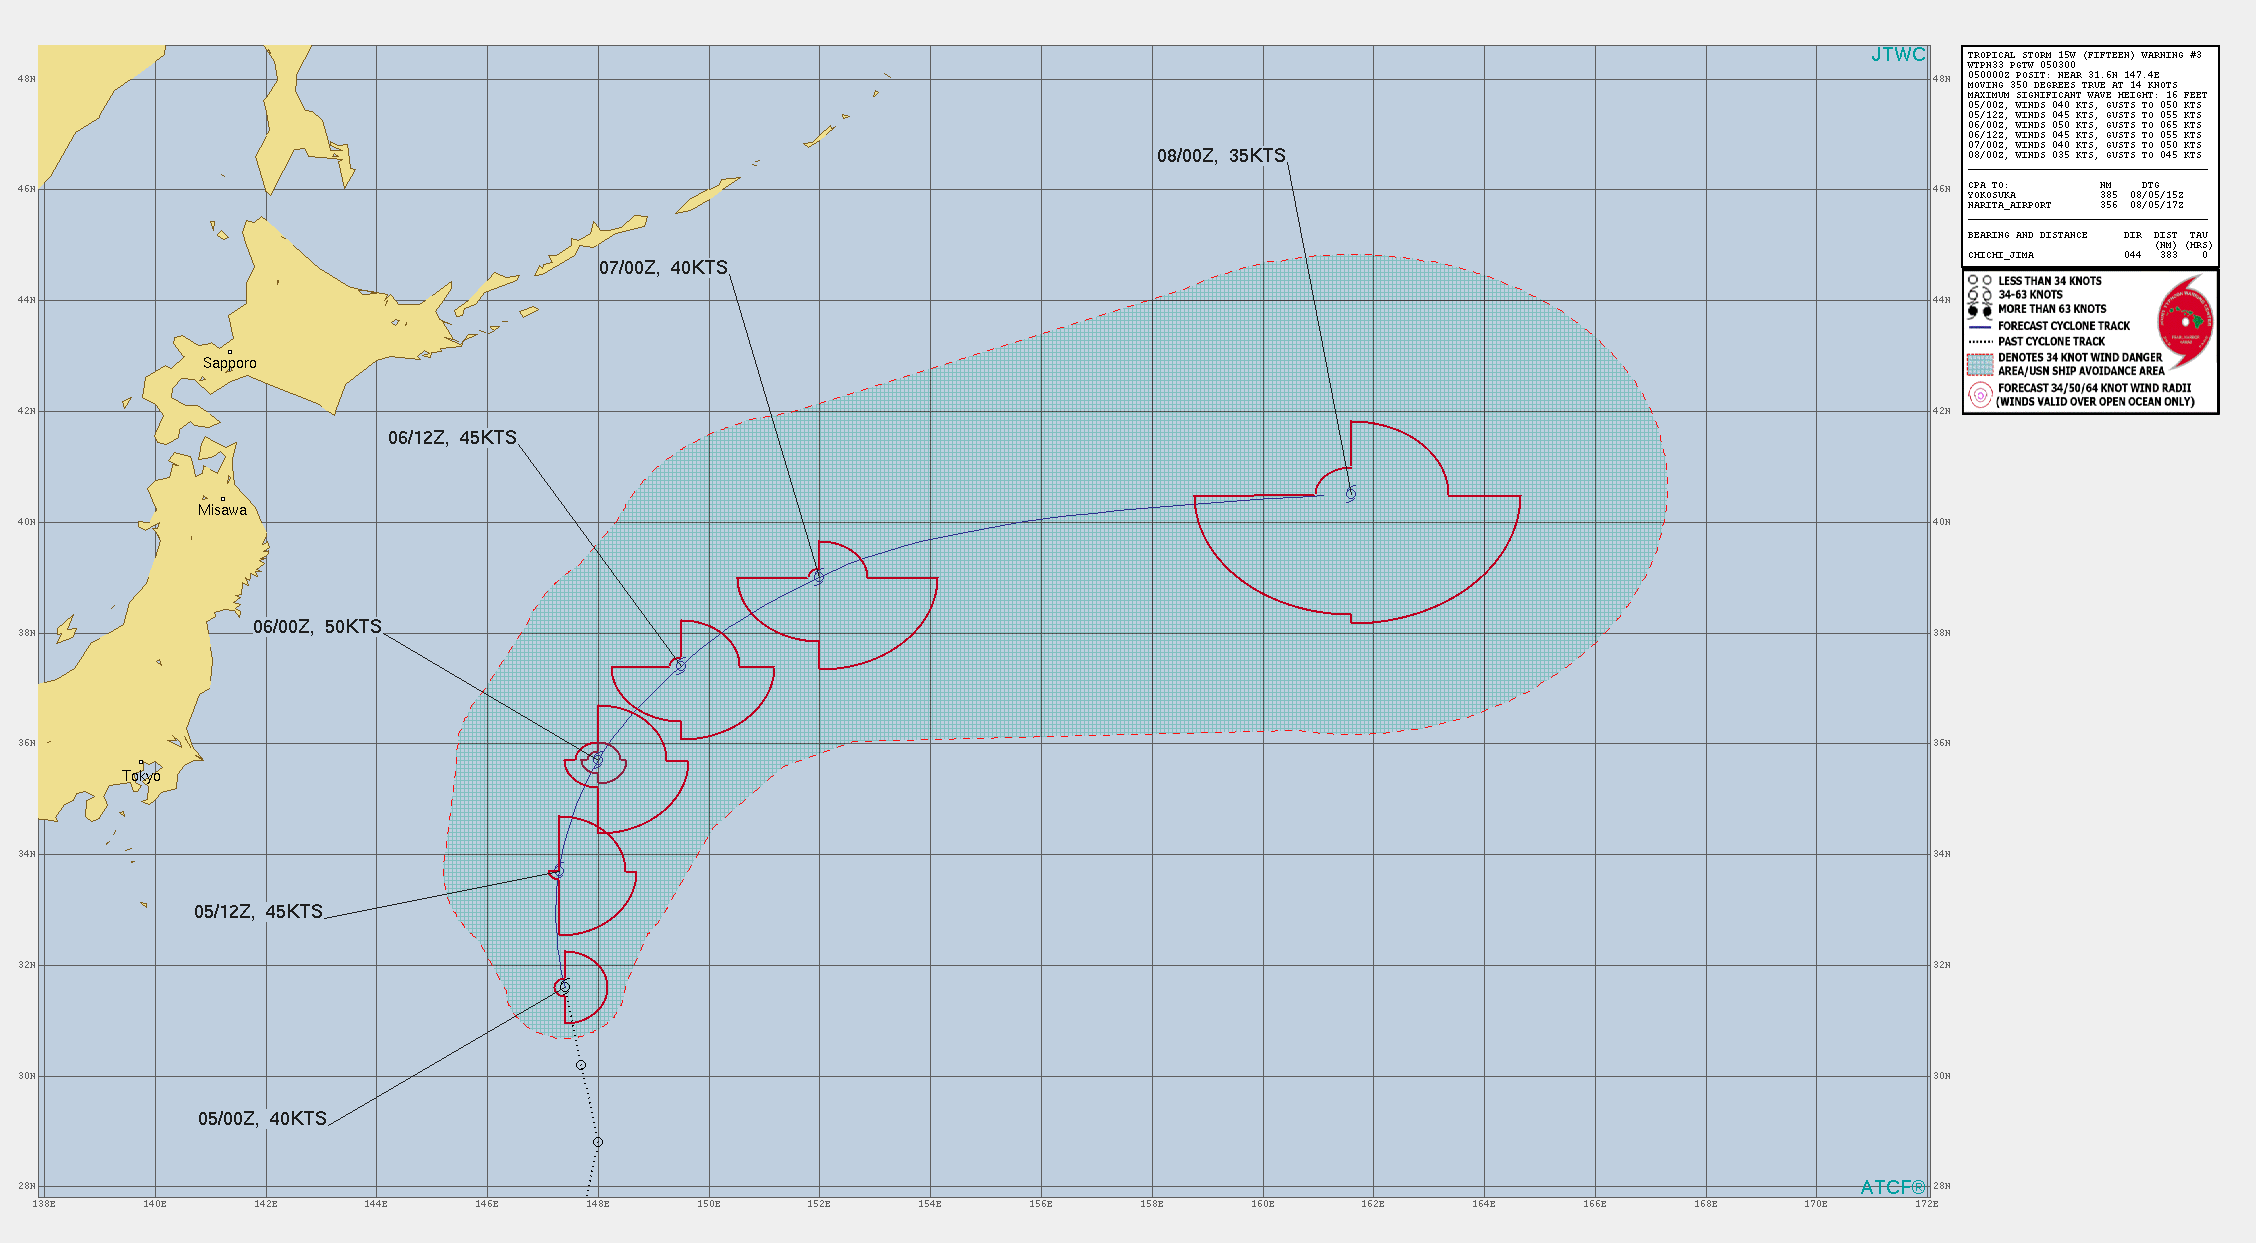 TS 15W. WARNING 3 ISSUED AT 05/03UTC.THERE ARE NO SIGNIFICANT CHANGES TO THE FORECAST FROM THE PREVIOUS WARNING.  FORECAST DISCUSSION: TS 15W WILL CONTINUE ON ITS CURRENT TRACK ALONG THE WESTERN PERIPHERY OF THE STR. AFTER TAU 18, IT WILL BEGIN TO ROUND THE STR AXIS THEN ACCELERATE NORTHEASTWARD AND INTENSIFY.  AS THE SYSTEM TRACKS POLEWARD, VWS WILL INCREASE AS IT APPROACHES  THE PREVAILING WESTERLIES. ADDITIONALLY, SSTS WILL BEGIN TO DROP  AFTER MAKING THE TURN NORTHEASTWARD. THE ENVIRONMENT WILL QUICKLY  BECOME MARGINAL BUT WILL STILL FUEL A SLIGHT INTENSIFICATION TO 50  KTS AT TAU 24. AFTERWARD, TS 15W WILL ENTER AN UNFAVORABLE  ENVIRONMENT WITH HIGH VWS AND LOW SSTS THAT WILL DECAY THE SYSTEM.  THERE IS A POSSIBILITY THAT THE SYSTEM WILL DISSIPATE BEFORE THE END  OF THE FORECAST PERIOD SHOULD THE MARGINAL ENVIRONMENT BECOME MORE  UNFAVORABLE. OTHERWISE, BY TAU 48, THE TS WILL BEGIN EXTRA-TROPICAL  TRANSITION (ETT) AND TRANSFORM INTO A GALE-FORCE COLD CORE LOW BY  TAU 72.